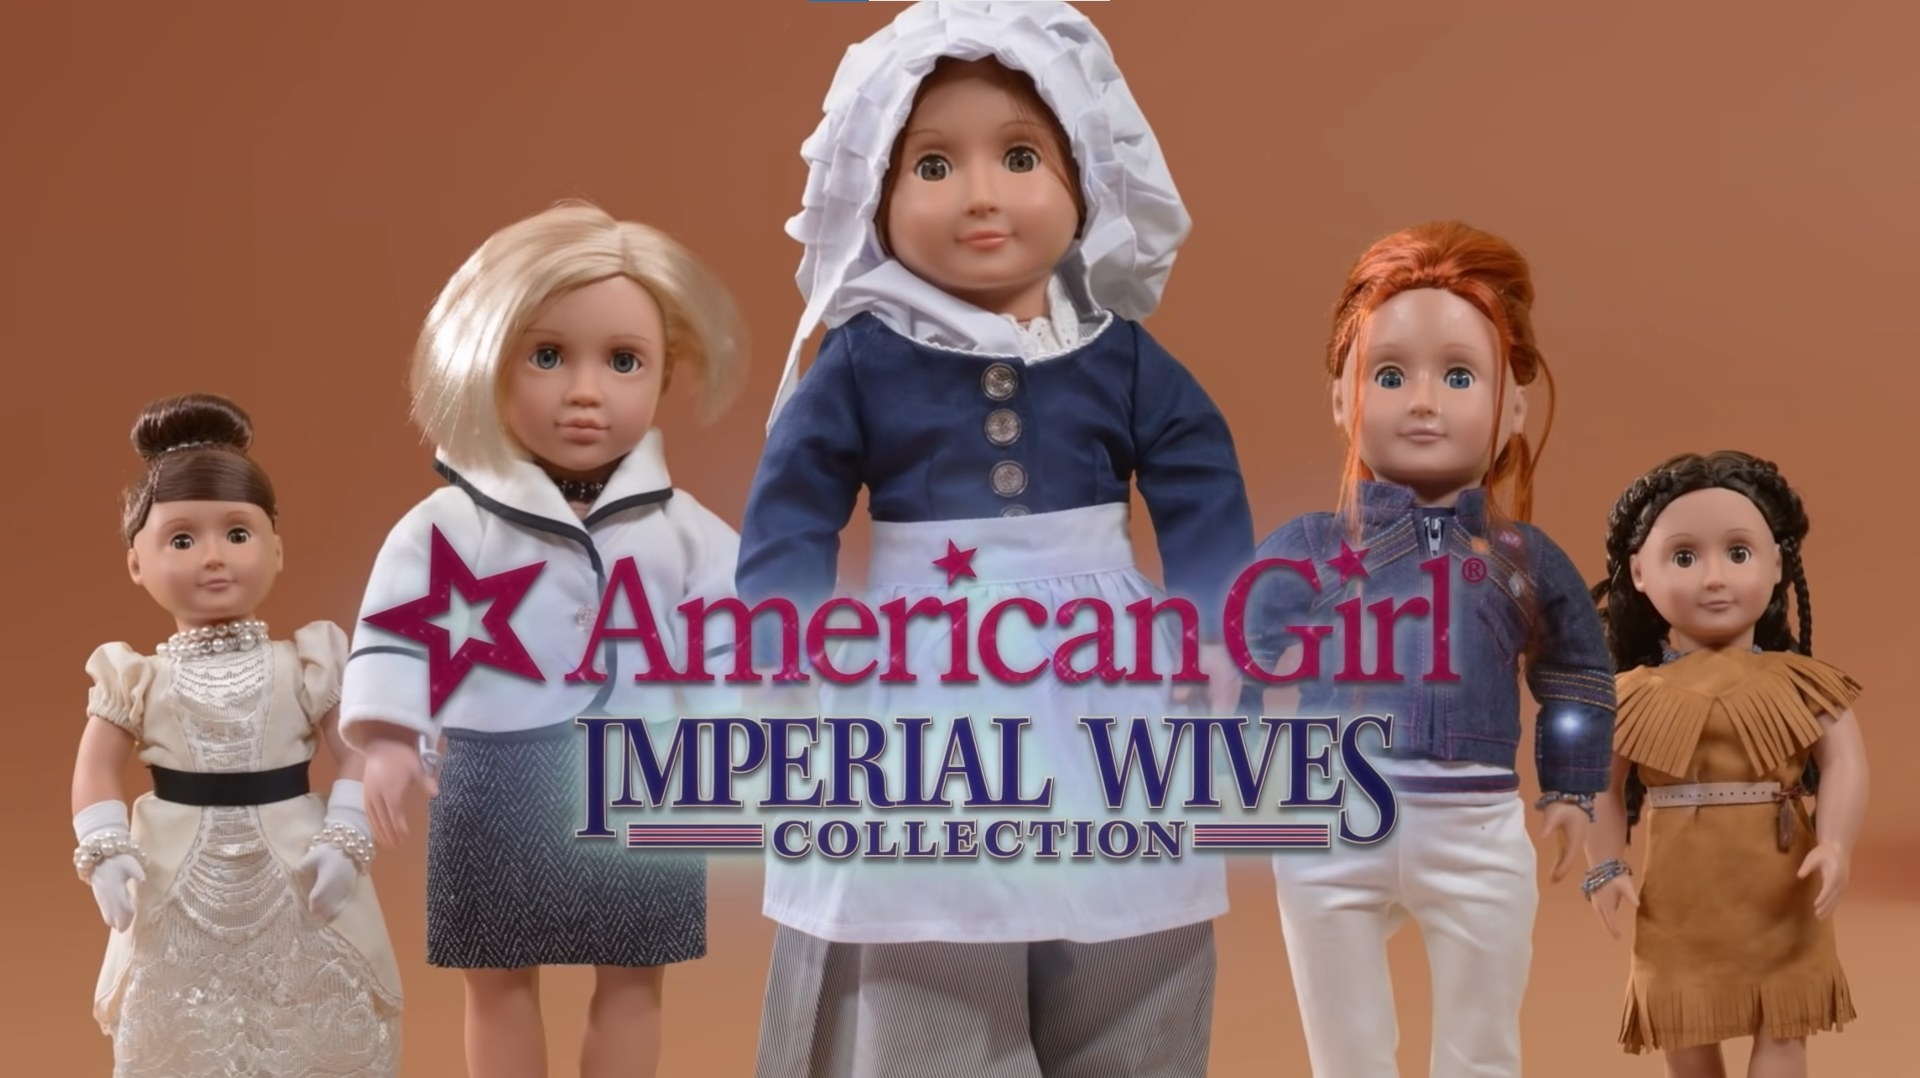 American Girl Imperial Wives Collection